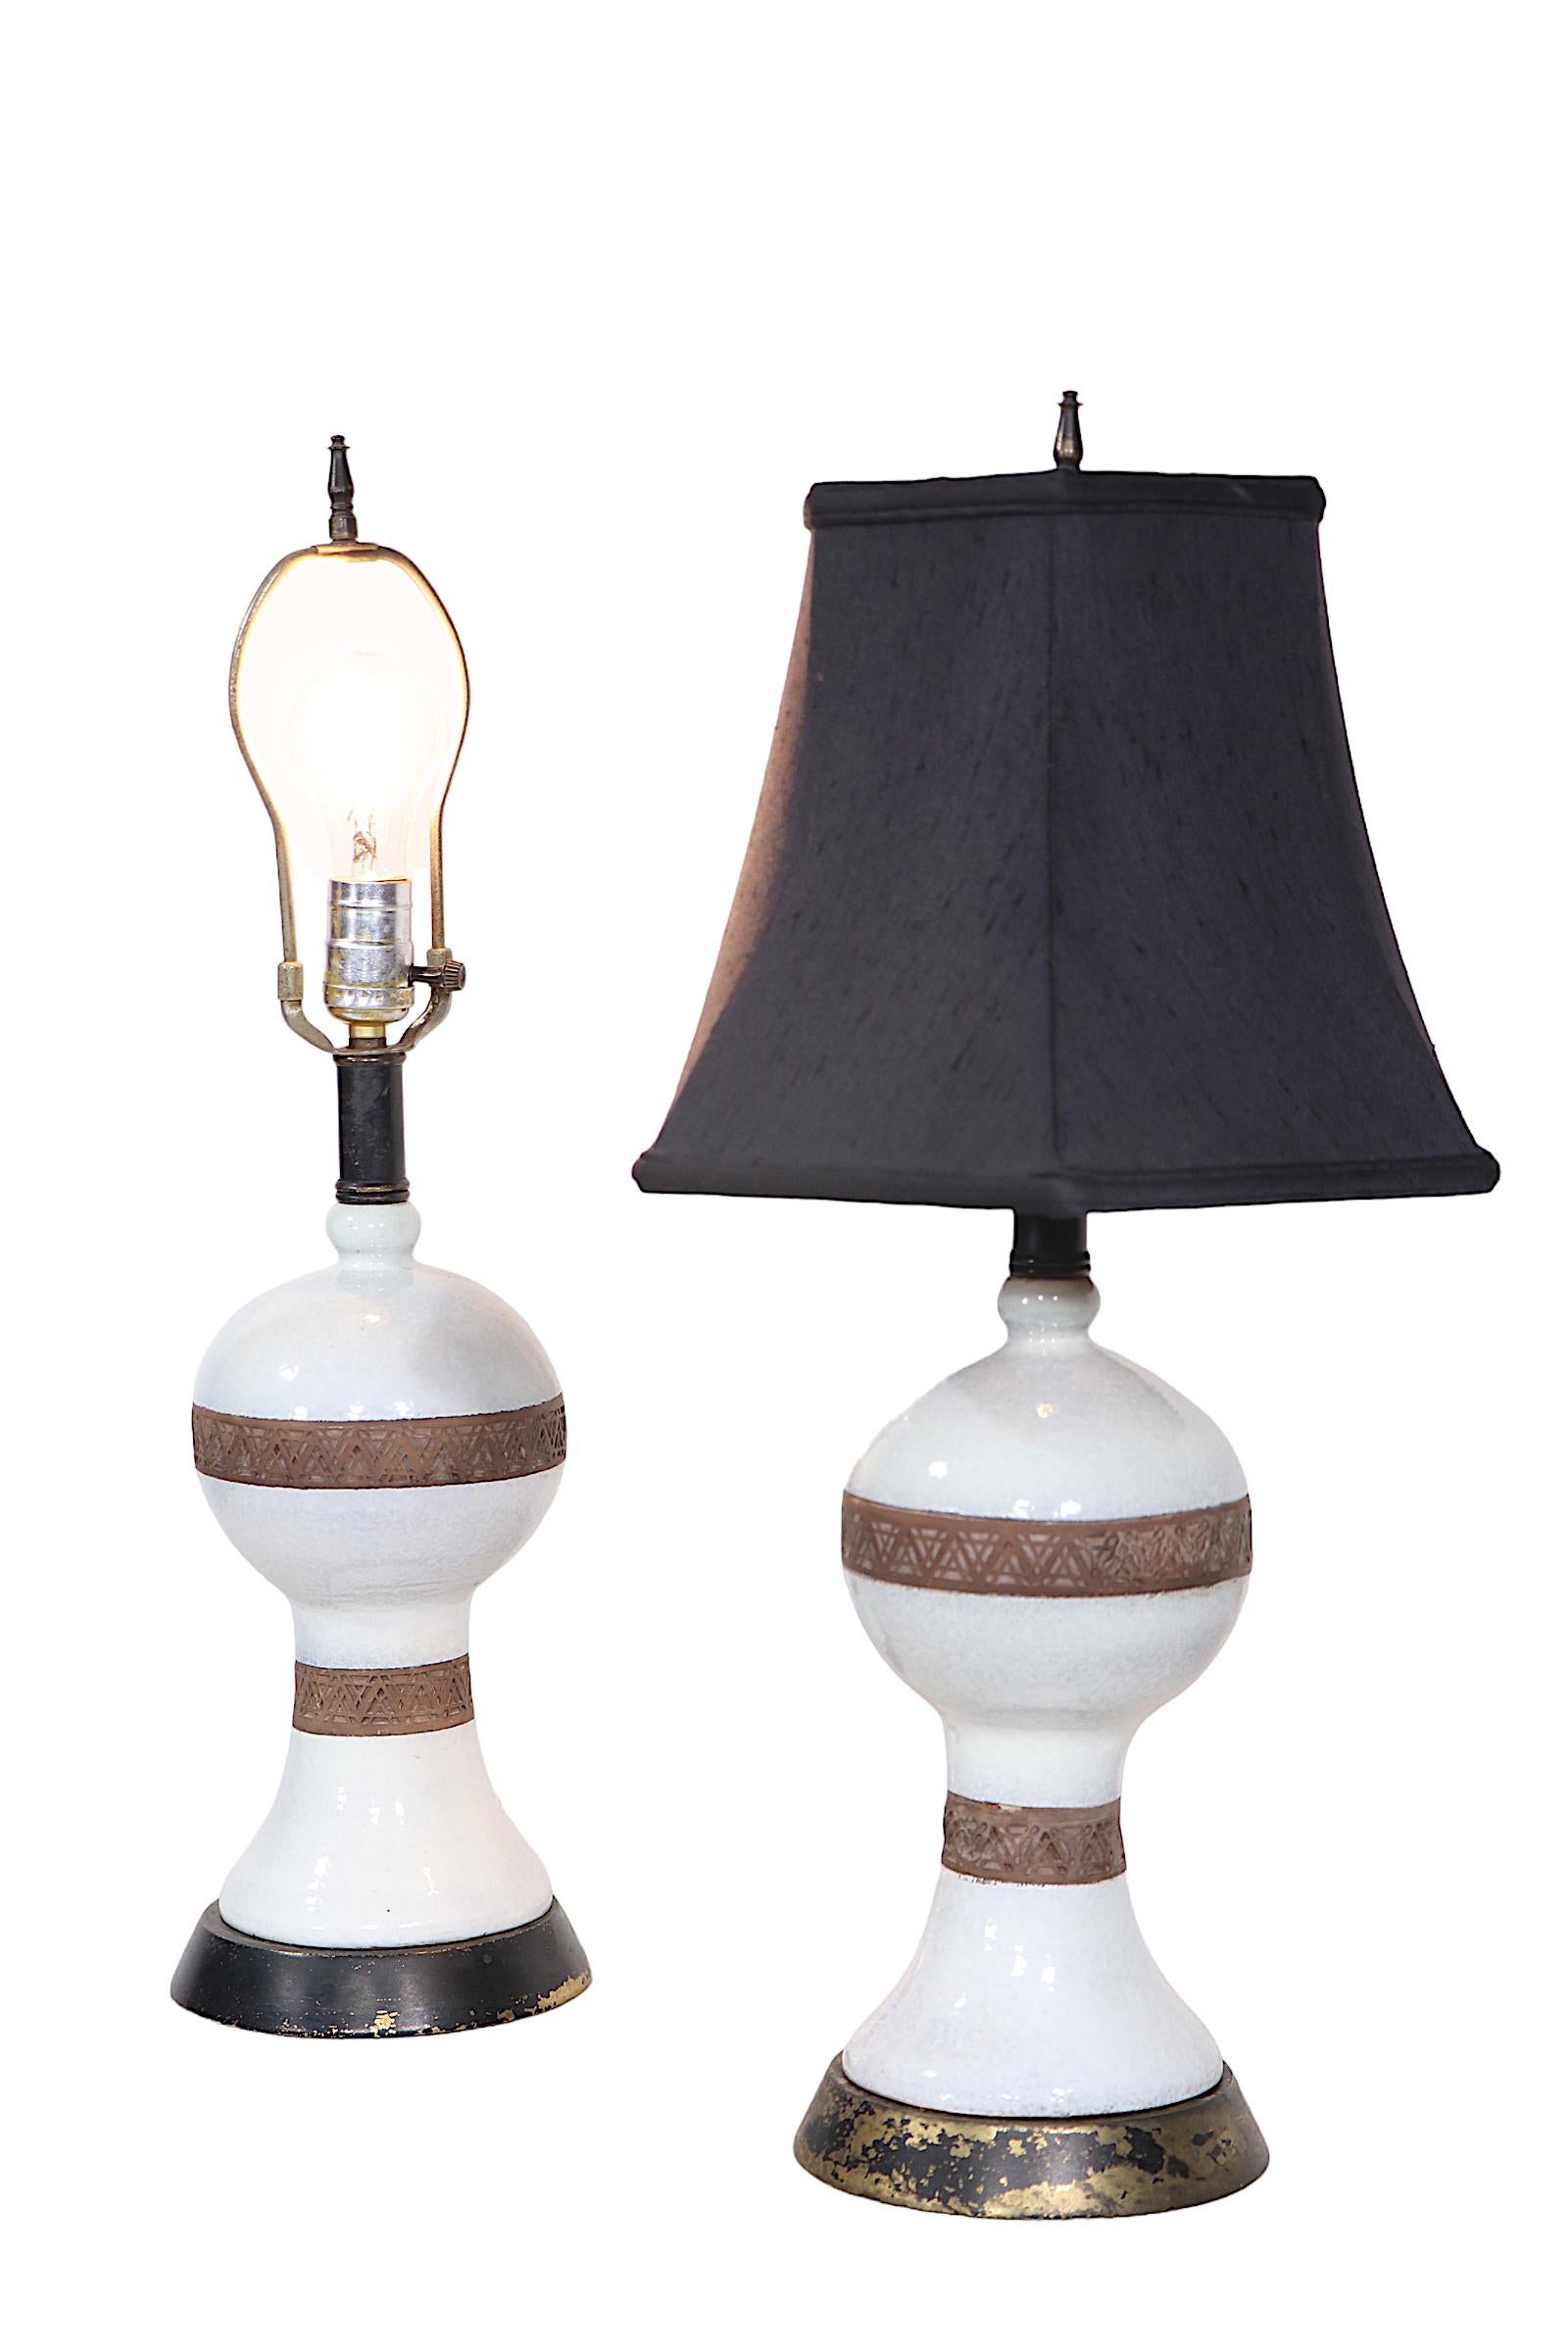 Pr. Ceramic Table Lamps Made in Italy Attr. to Urbano Zaccagnini  In Good Condition For Sale In New York, NY